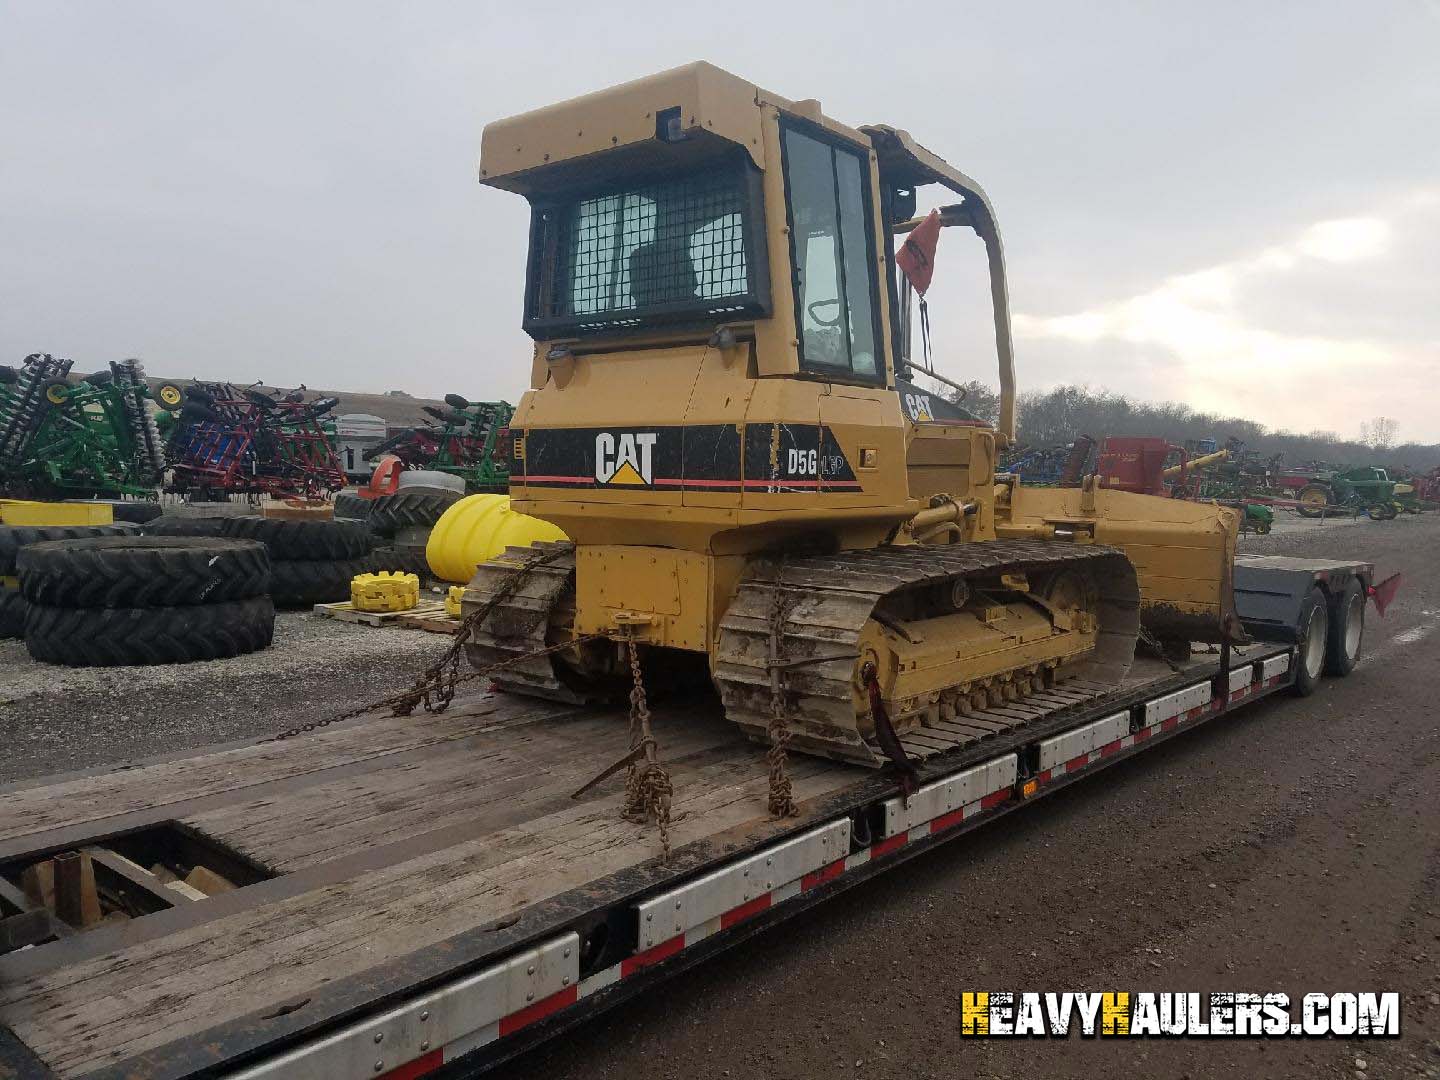 CAT dozer shipped on an flatbed